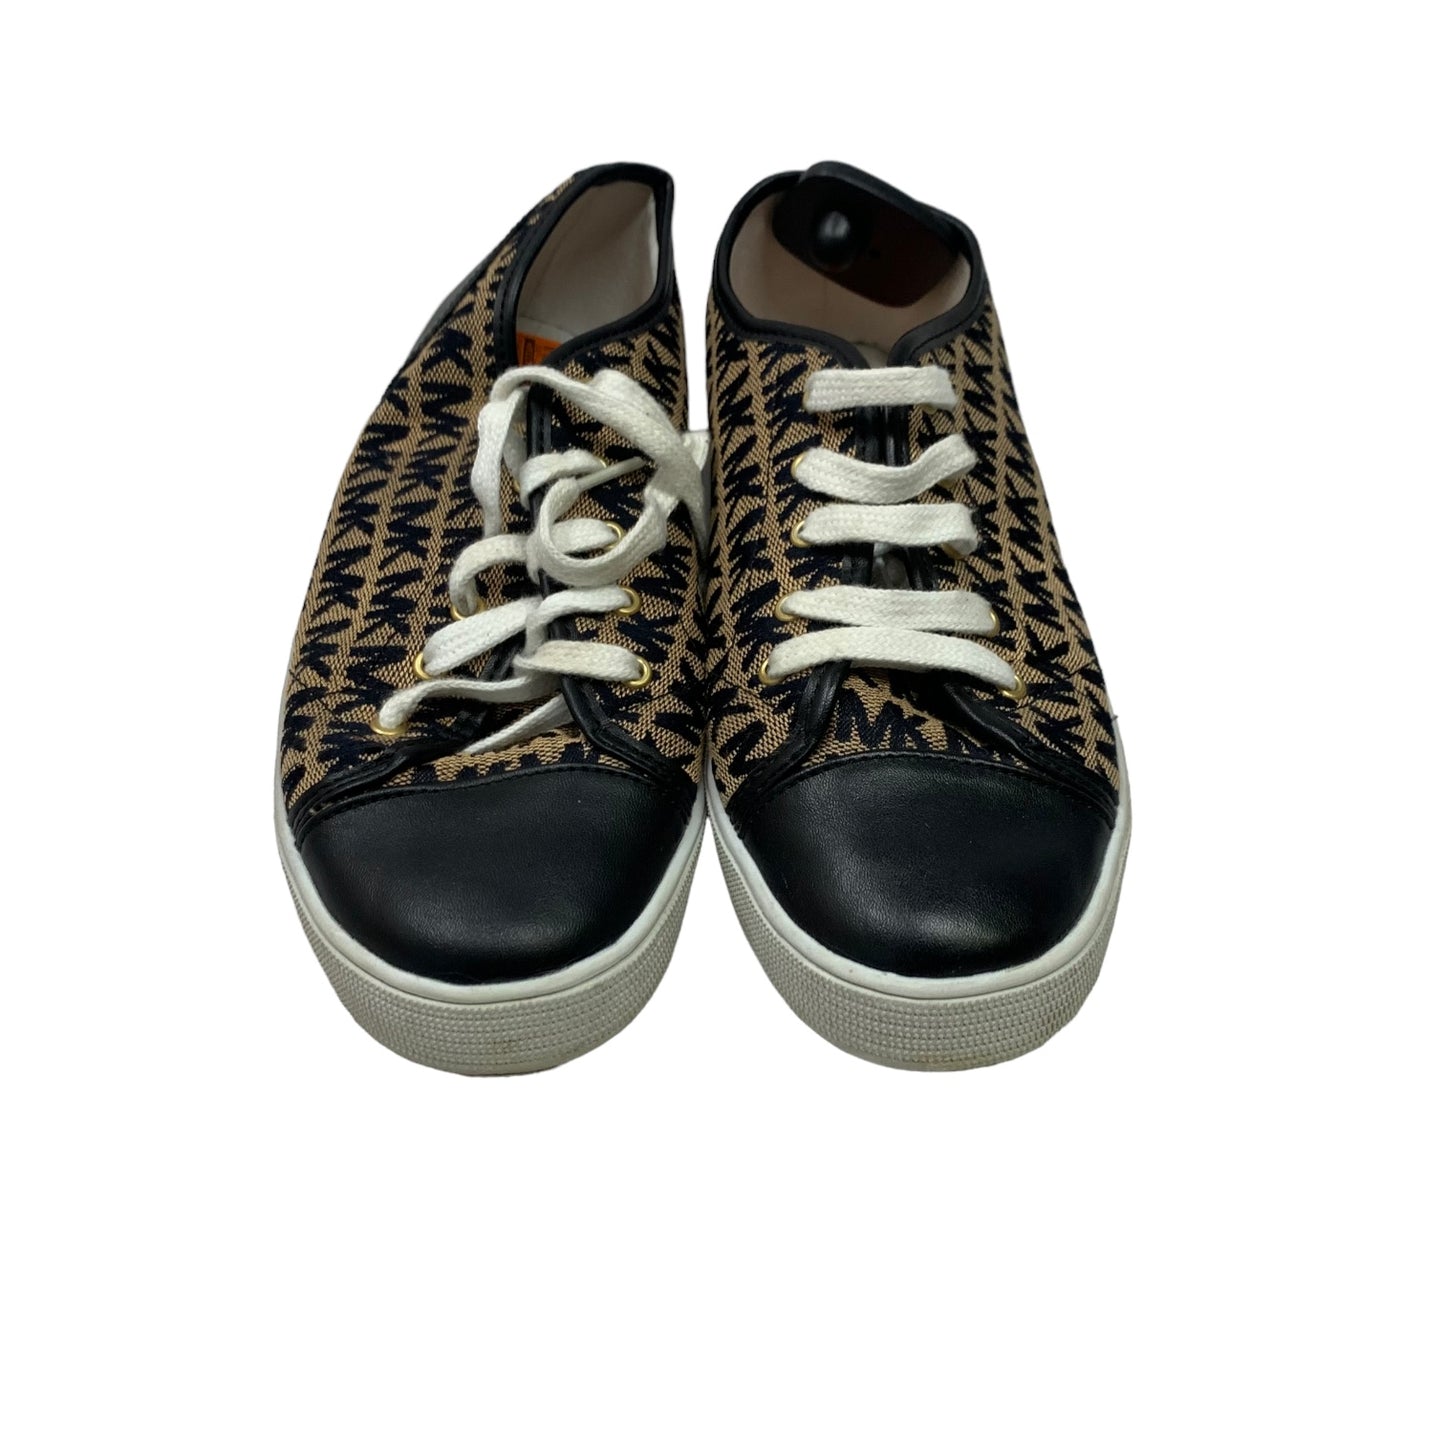 Shoes Sneakers By Michael By Michael Kors  Size: 5